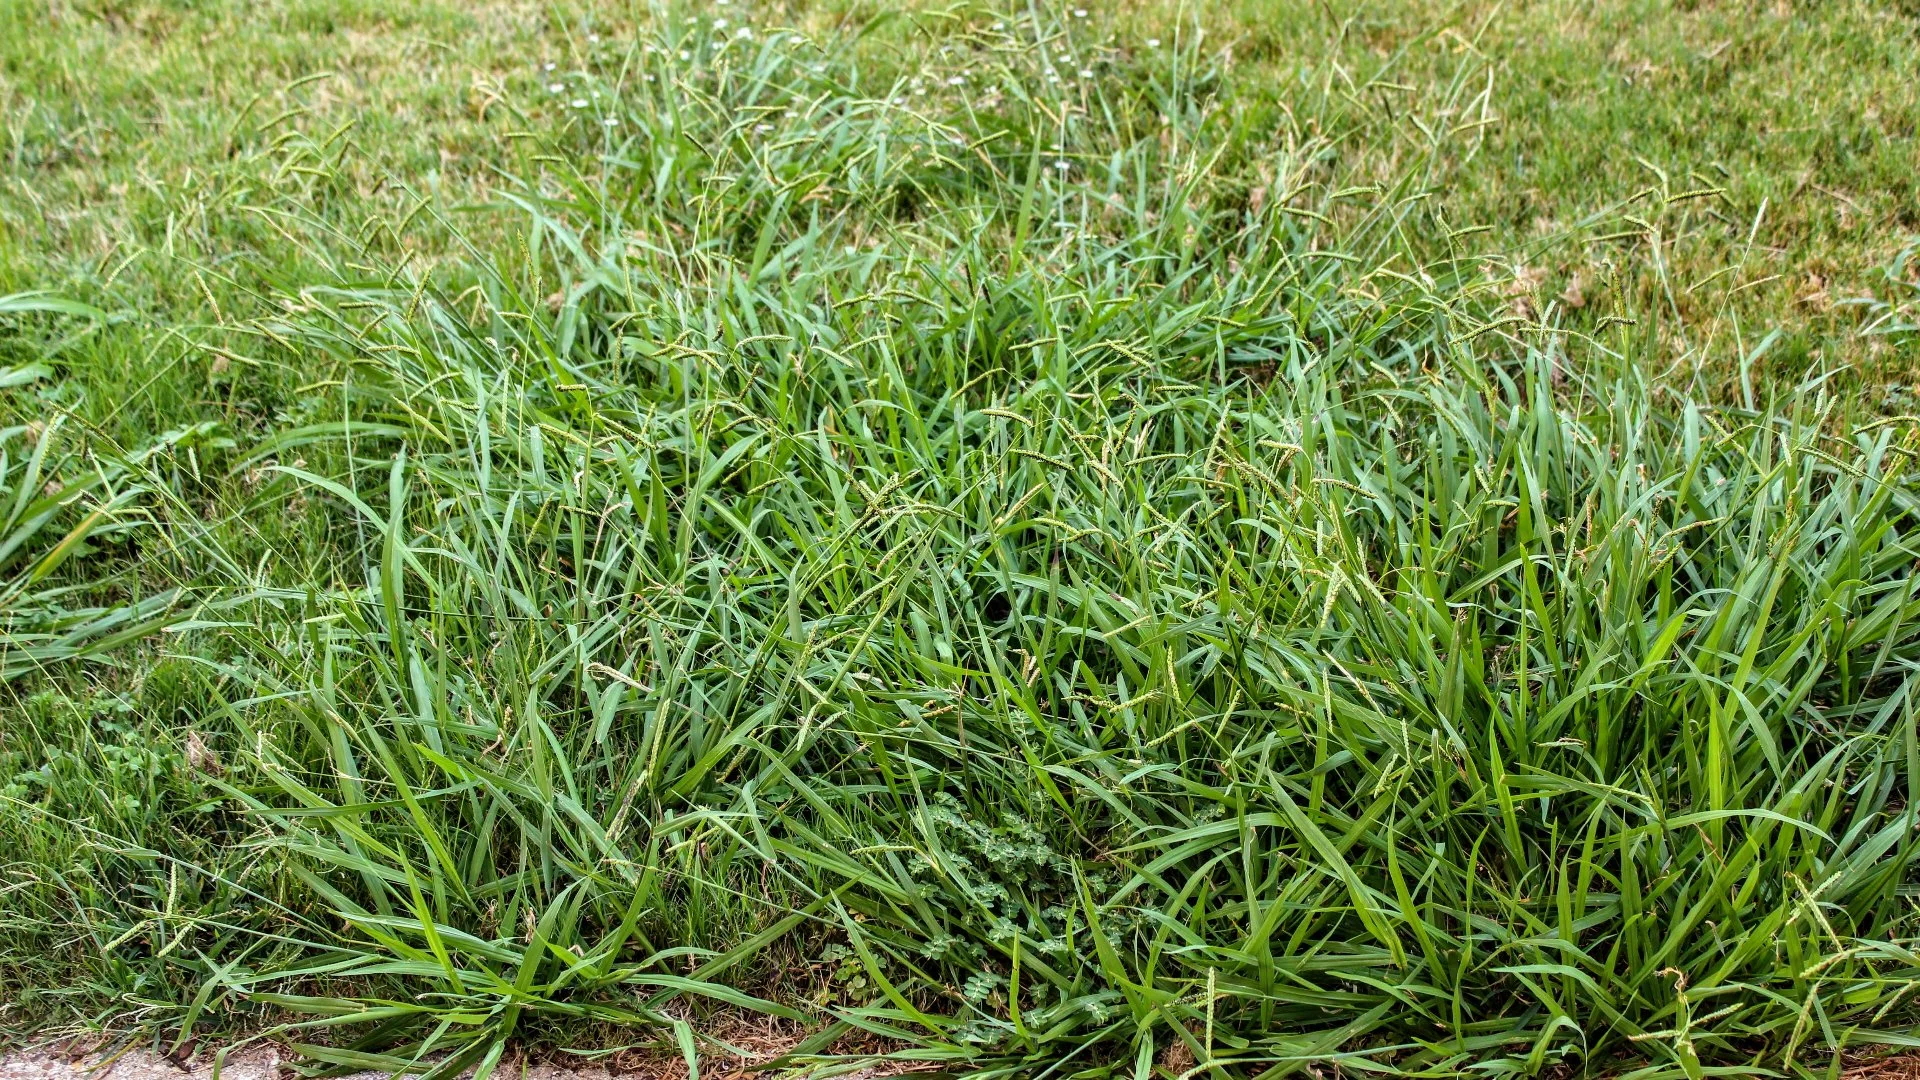 Should I Use Pre-Emergent or Post-Emergent Weed Control in the Fall?